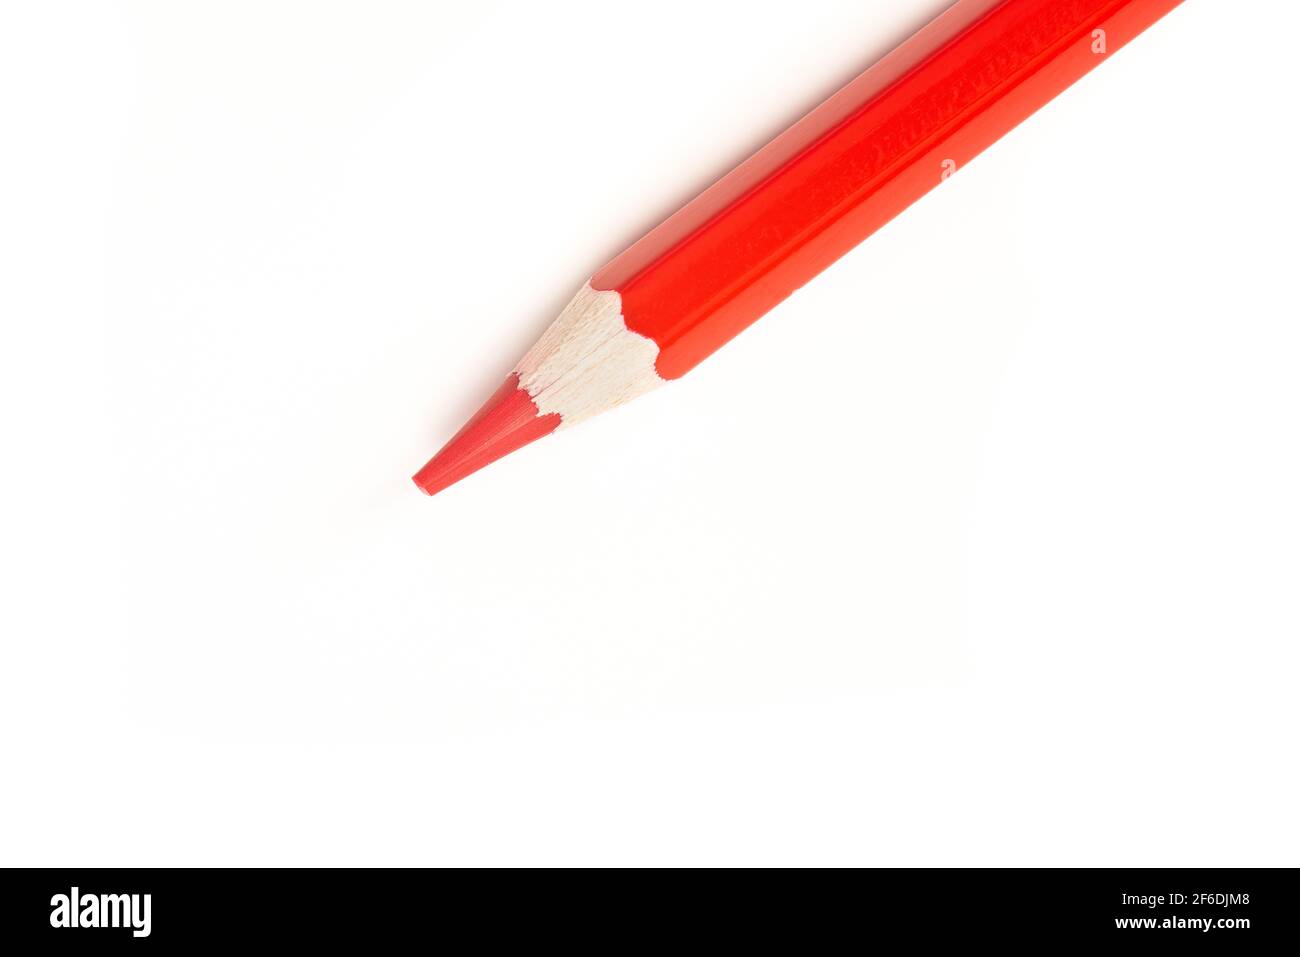 Close up of a red color pencil seen from a high angle on a white background Stock Photo